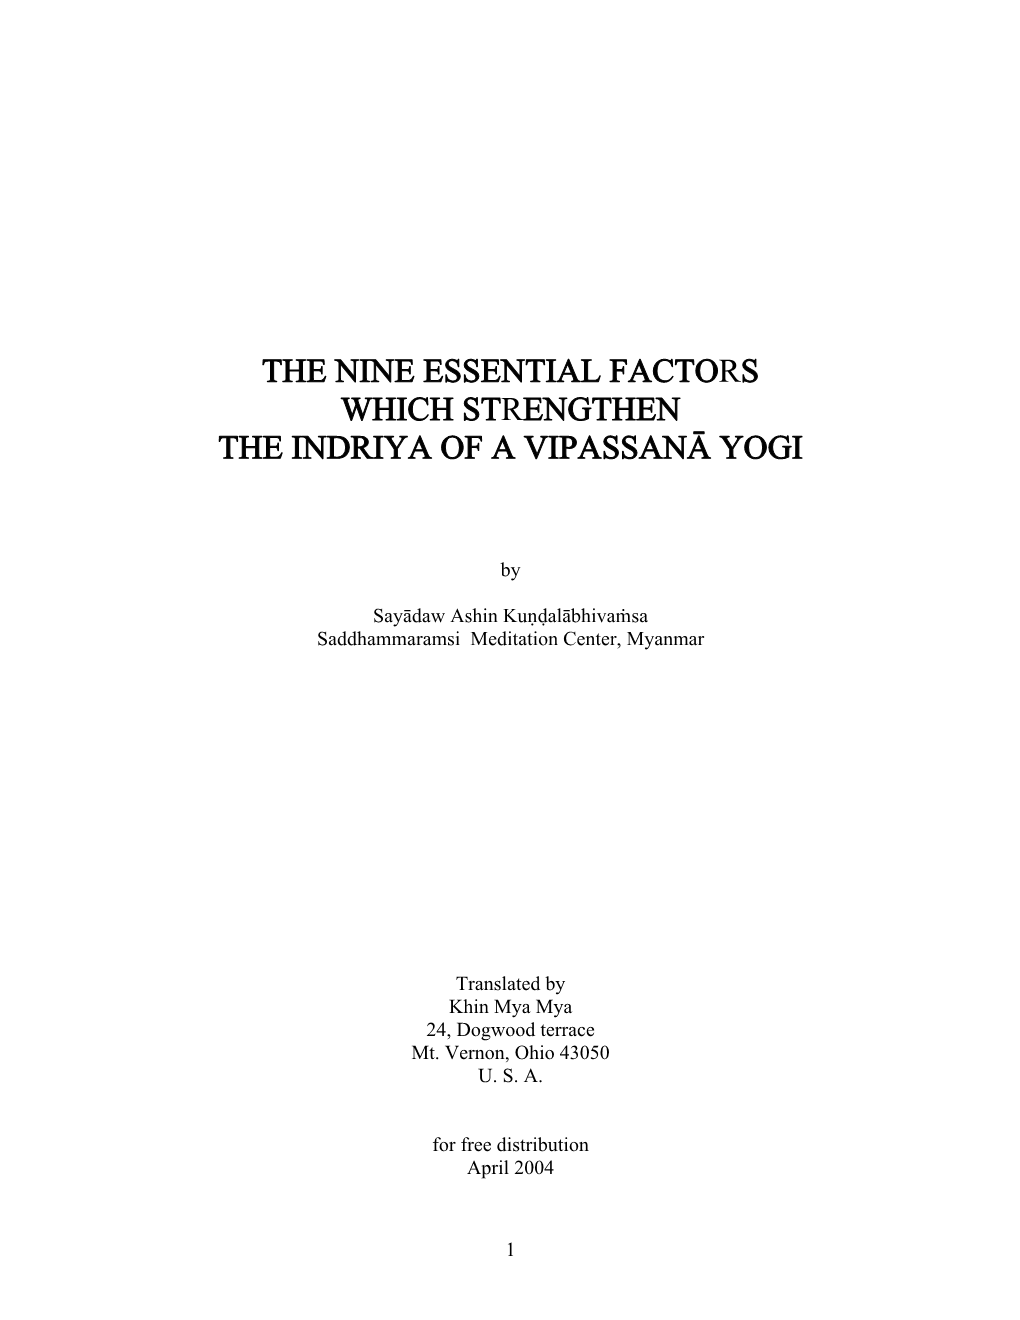 The Nine Essential Factors Which Strengthen the Indriya of a Vipassanā Yogi